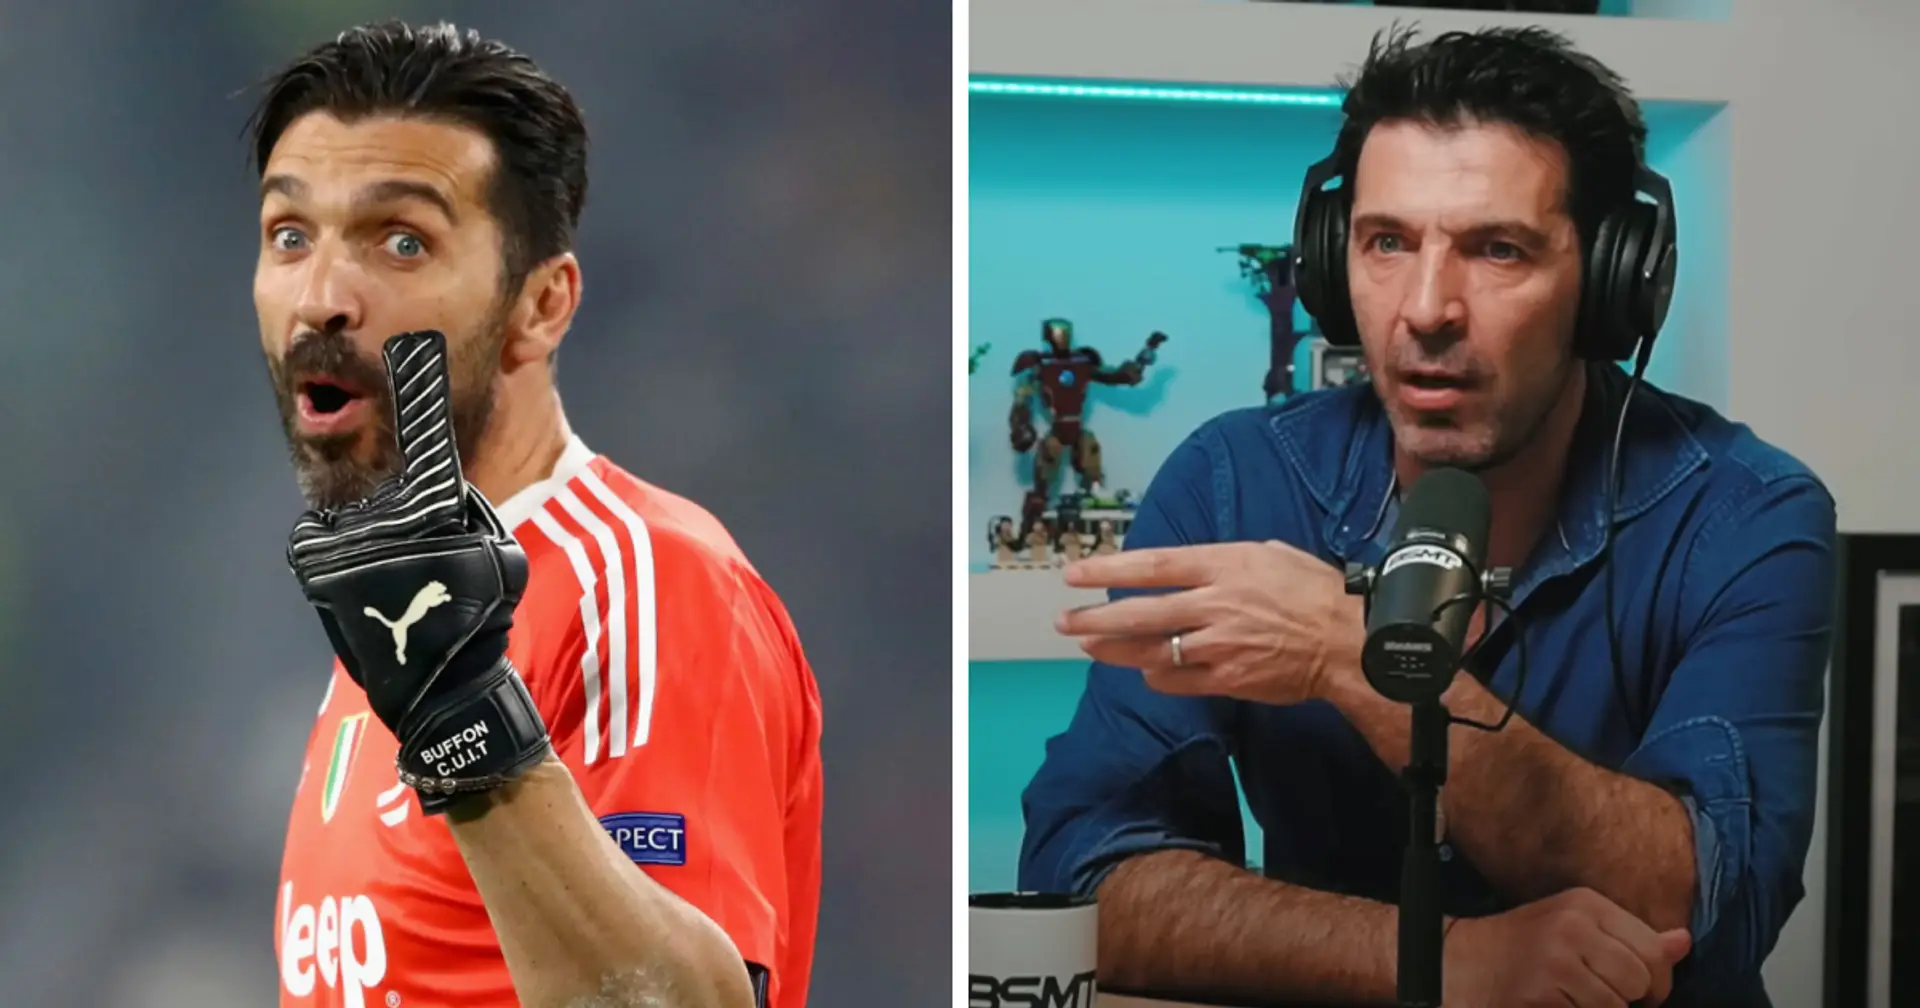 'He always scored against me': Gianluigi Buffon names attacker who caused him the most pain